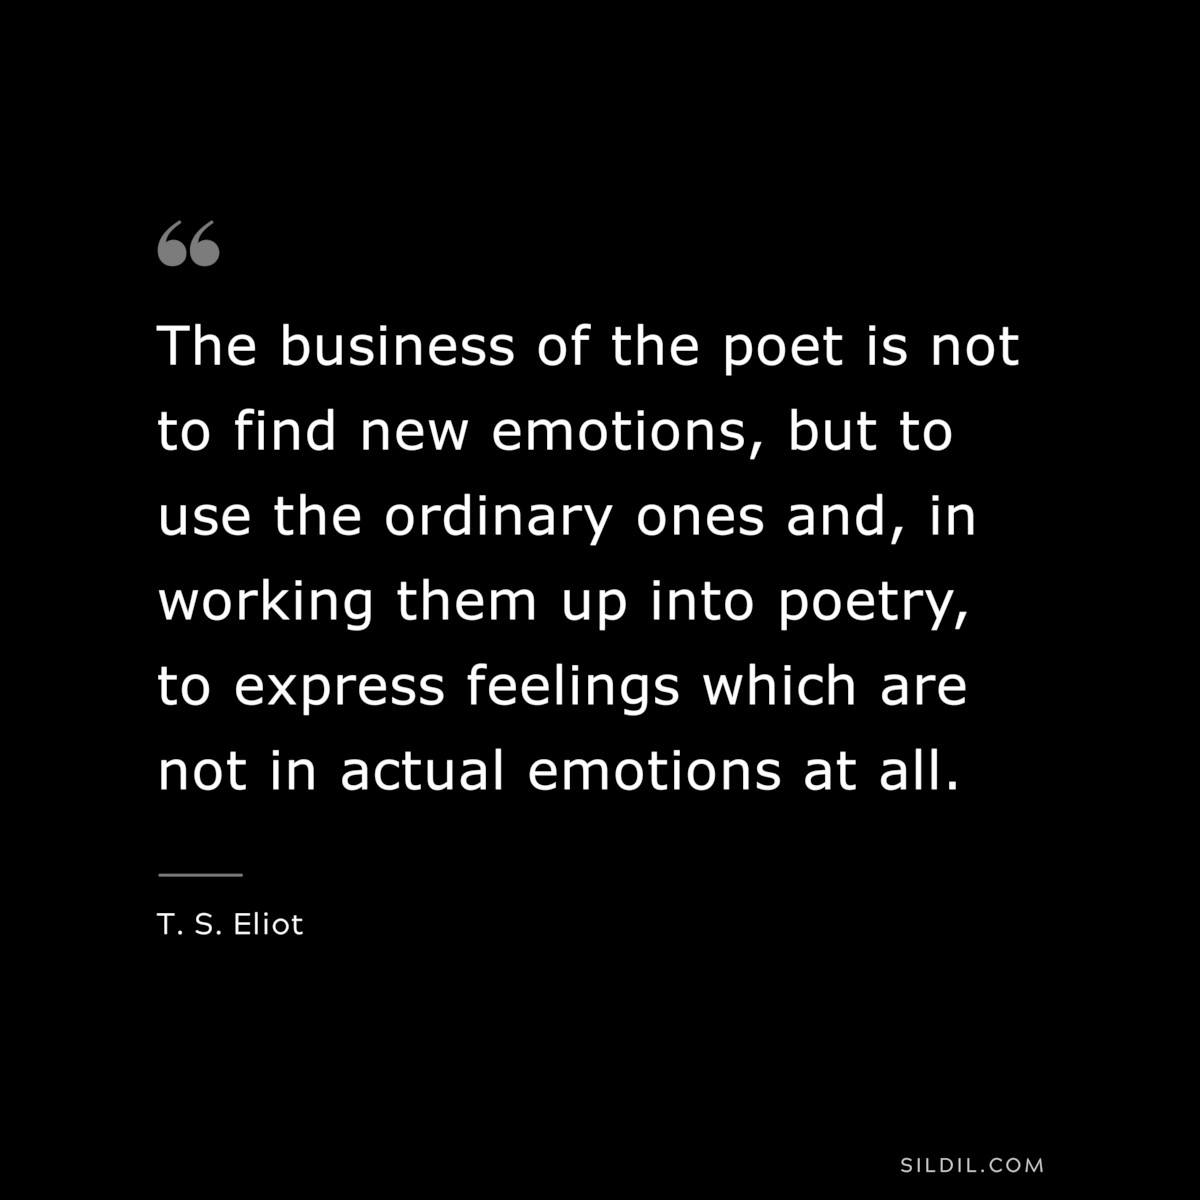 The business of the poet is not to find new emotions, but to use the ordinary ones and, in working them up into poetry, to express feelings which are not in actual emotions at all. ― T. S. Eliot